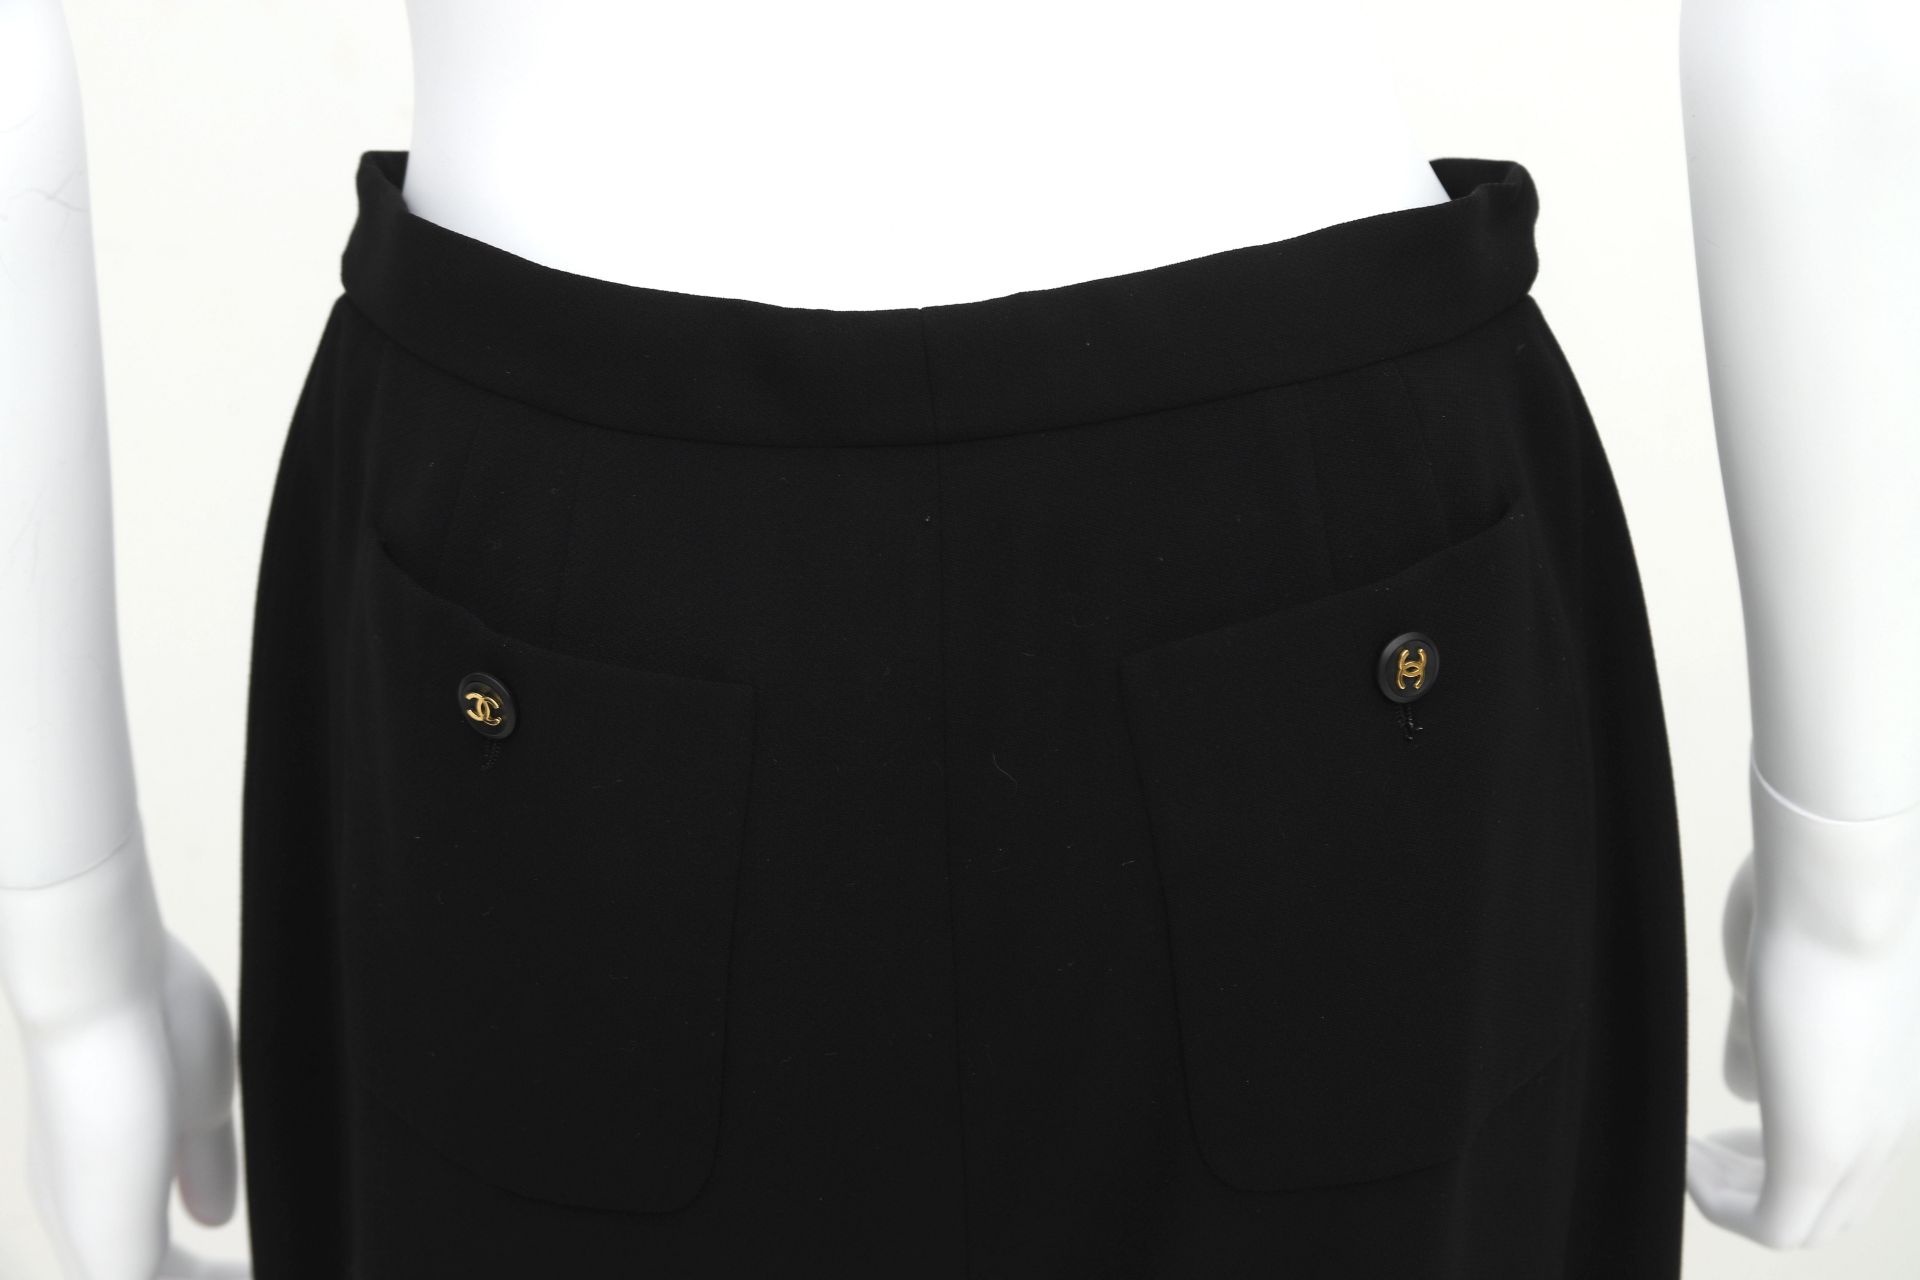 Chanel Boutique black trousers with CC logo buttons. The trousers have two pockets on the front. - Bild 5 aus 6